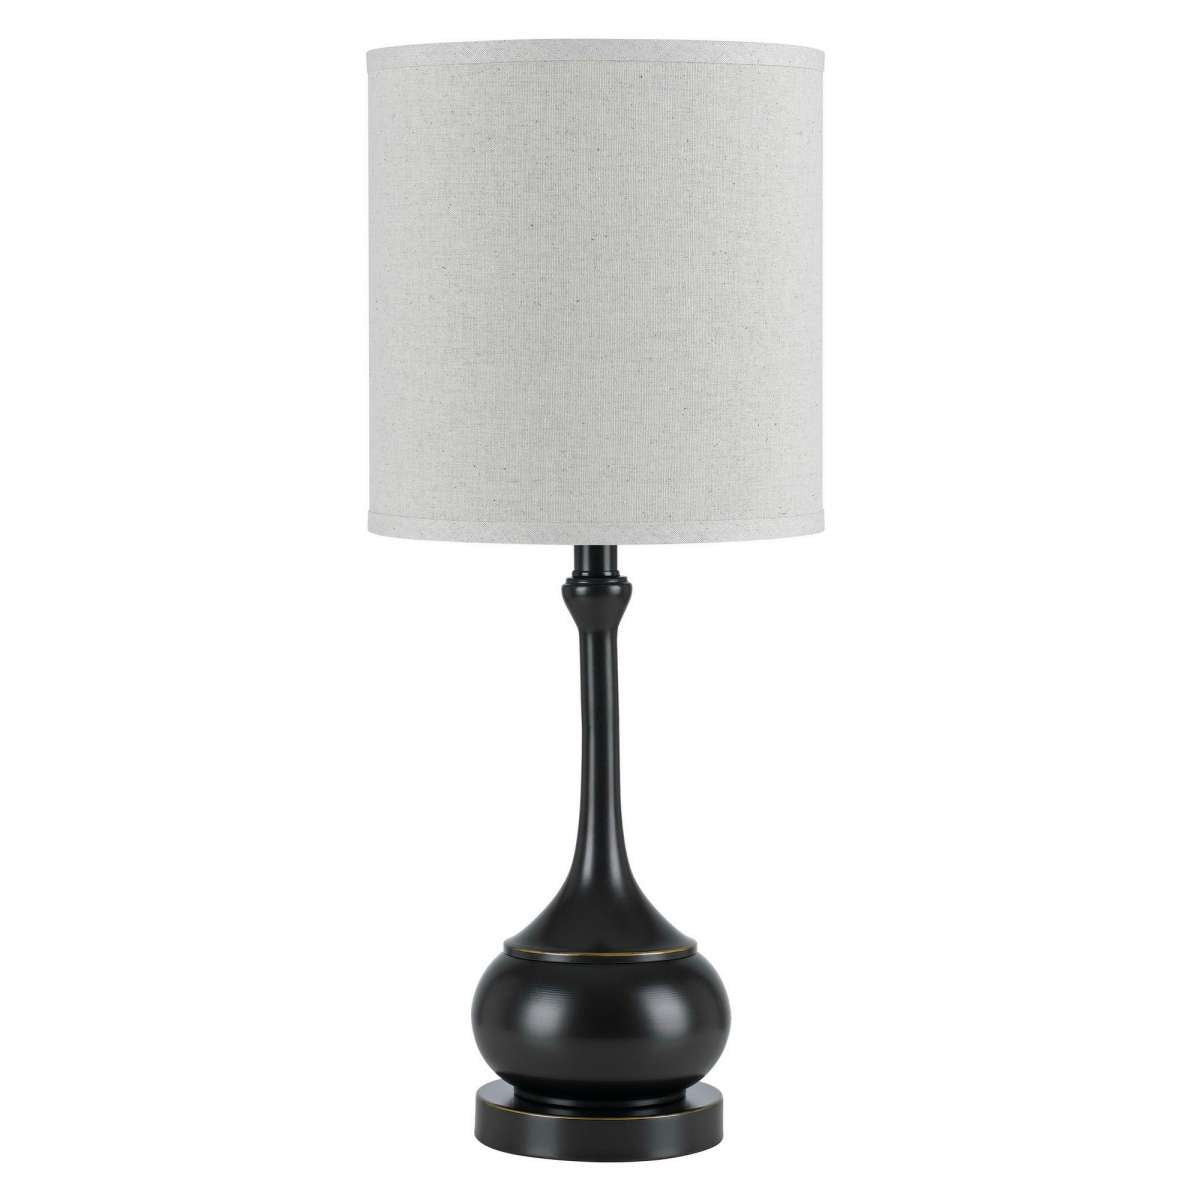 Elongated Bellied Shape Metal Accent Lamp With Drum Shade, Black By Benzara